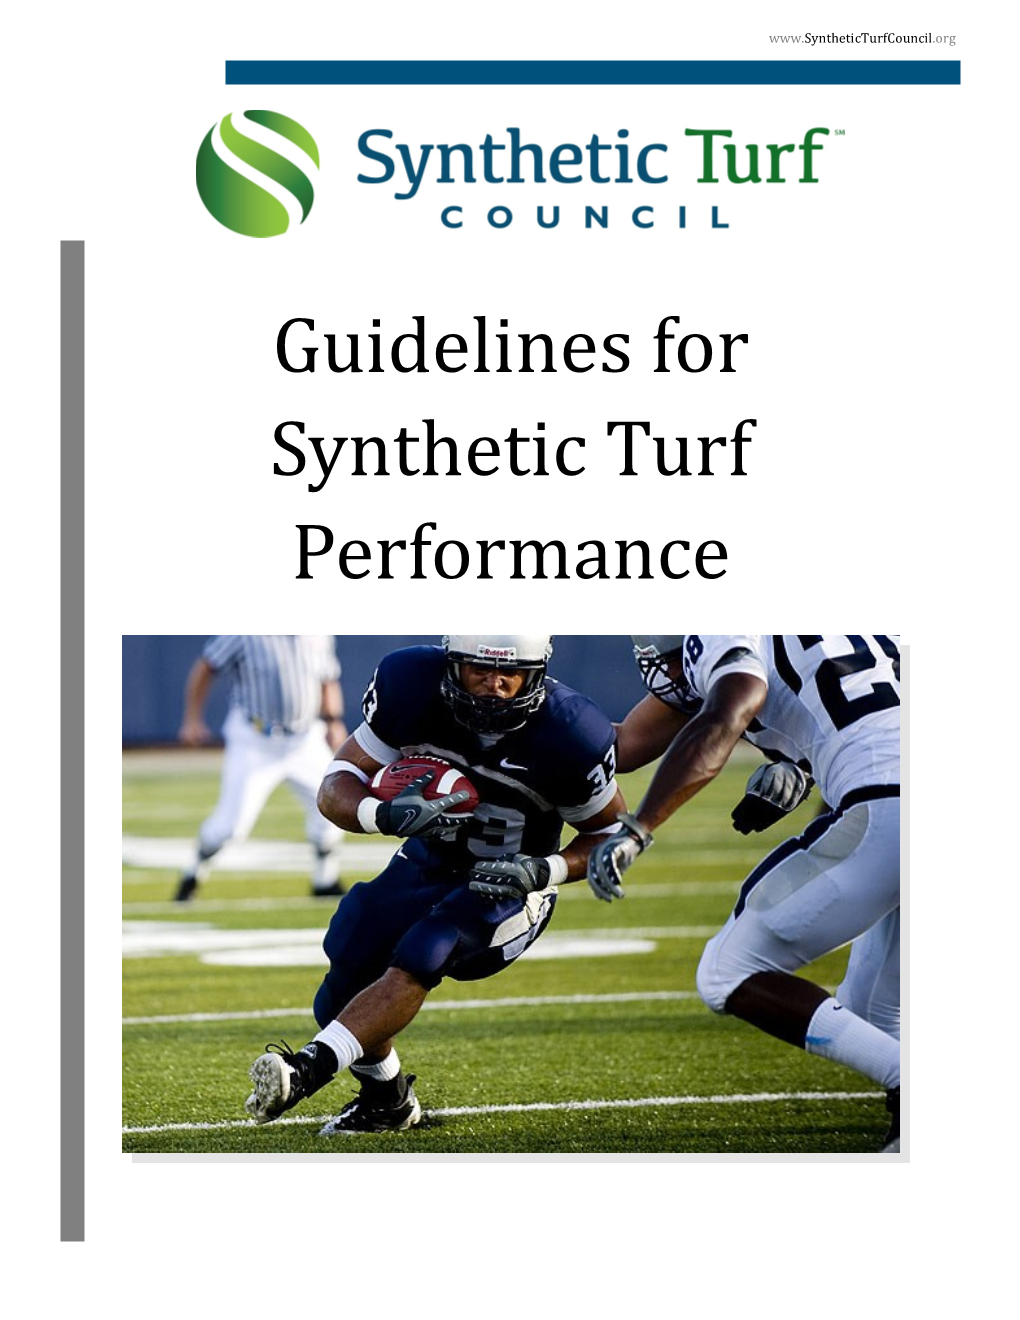 Guidelines for Synthetic Turf Performance